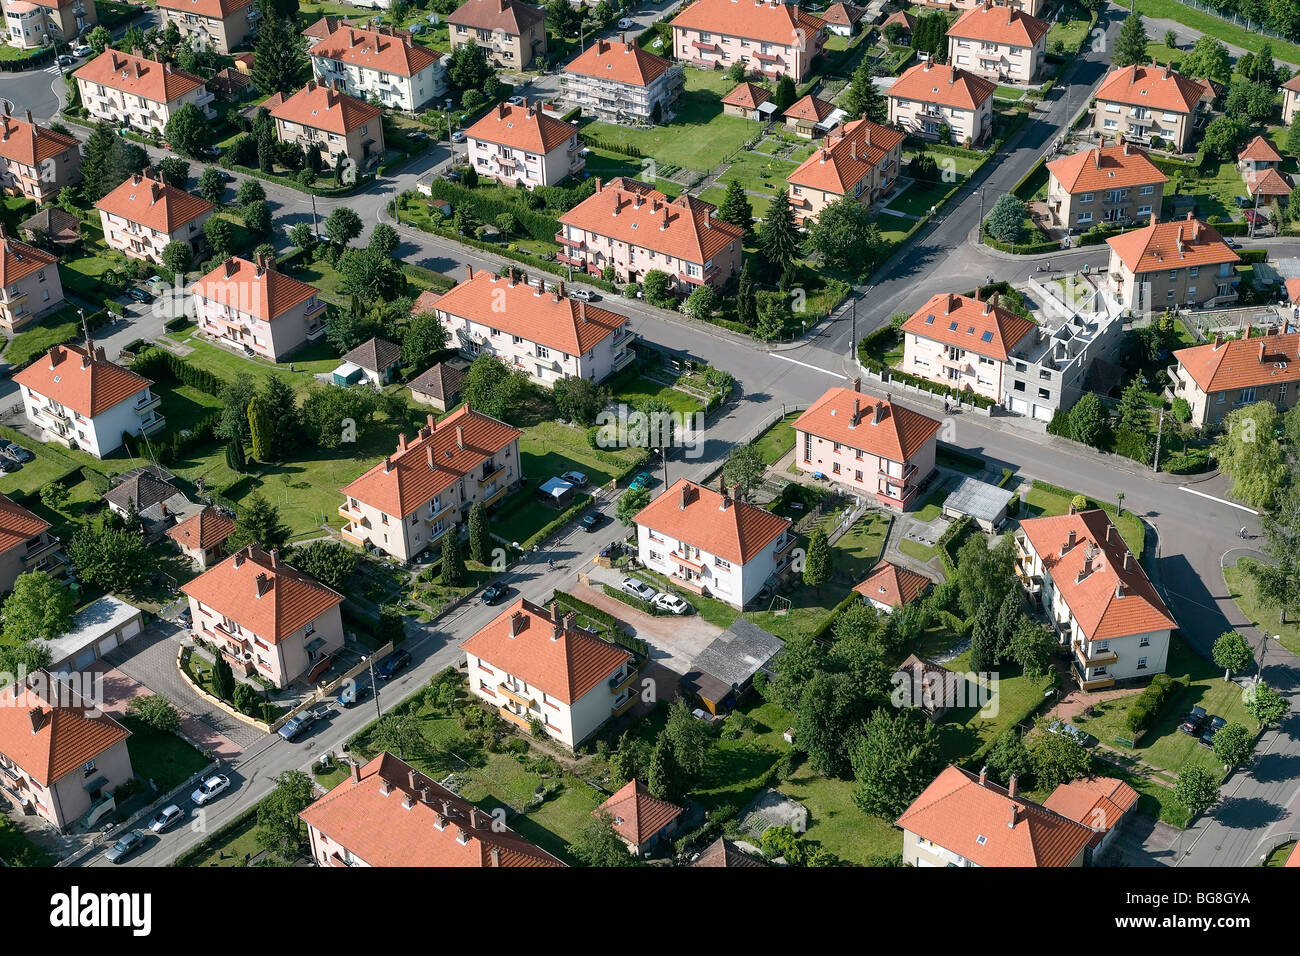 Aerial view over a workers' housing estate / development Stock Photo